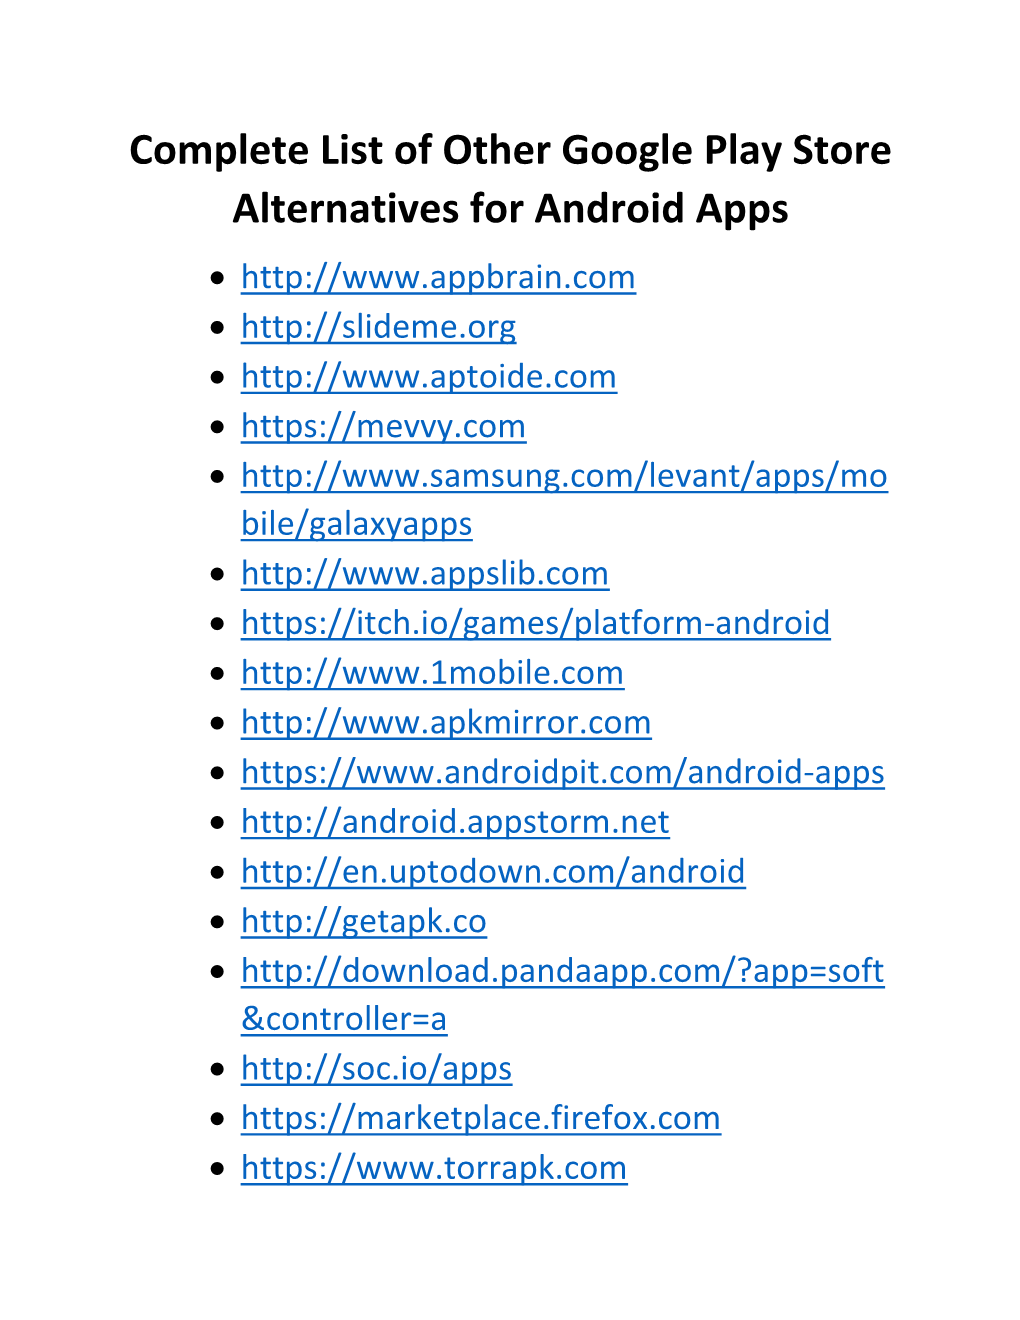 Complete List of Other Google Play Store Alternatives for Android Apps